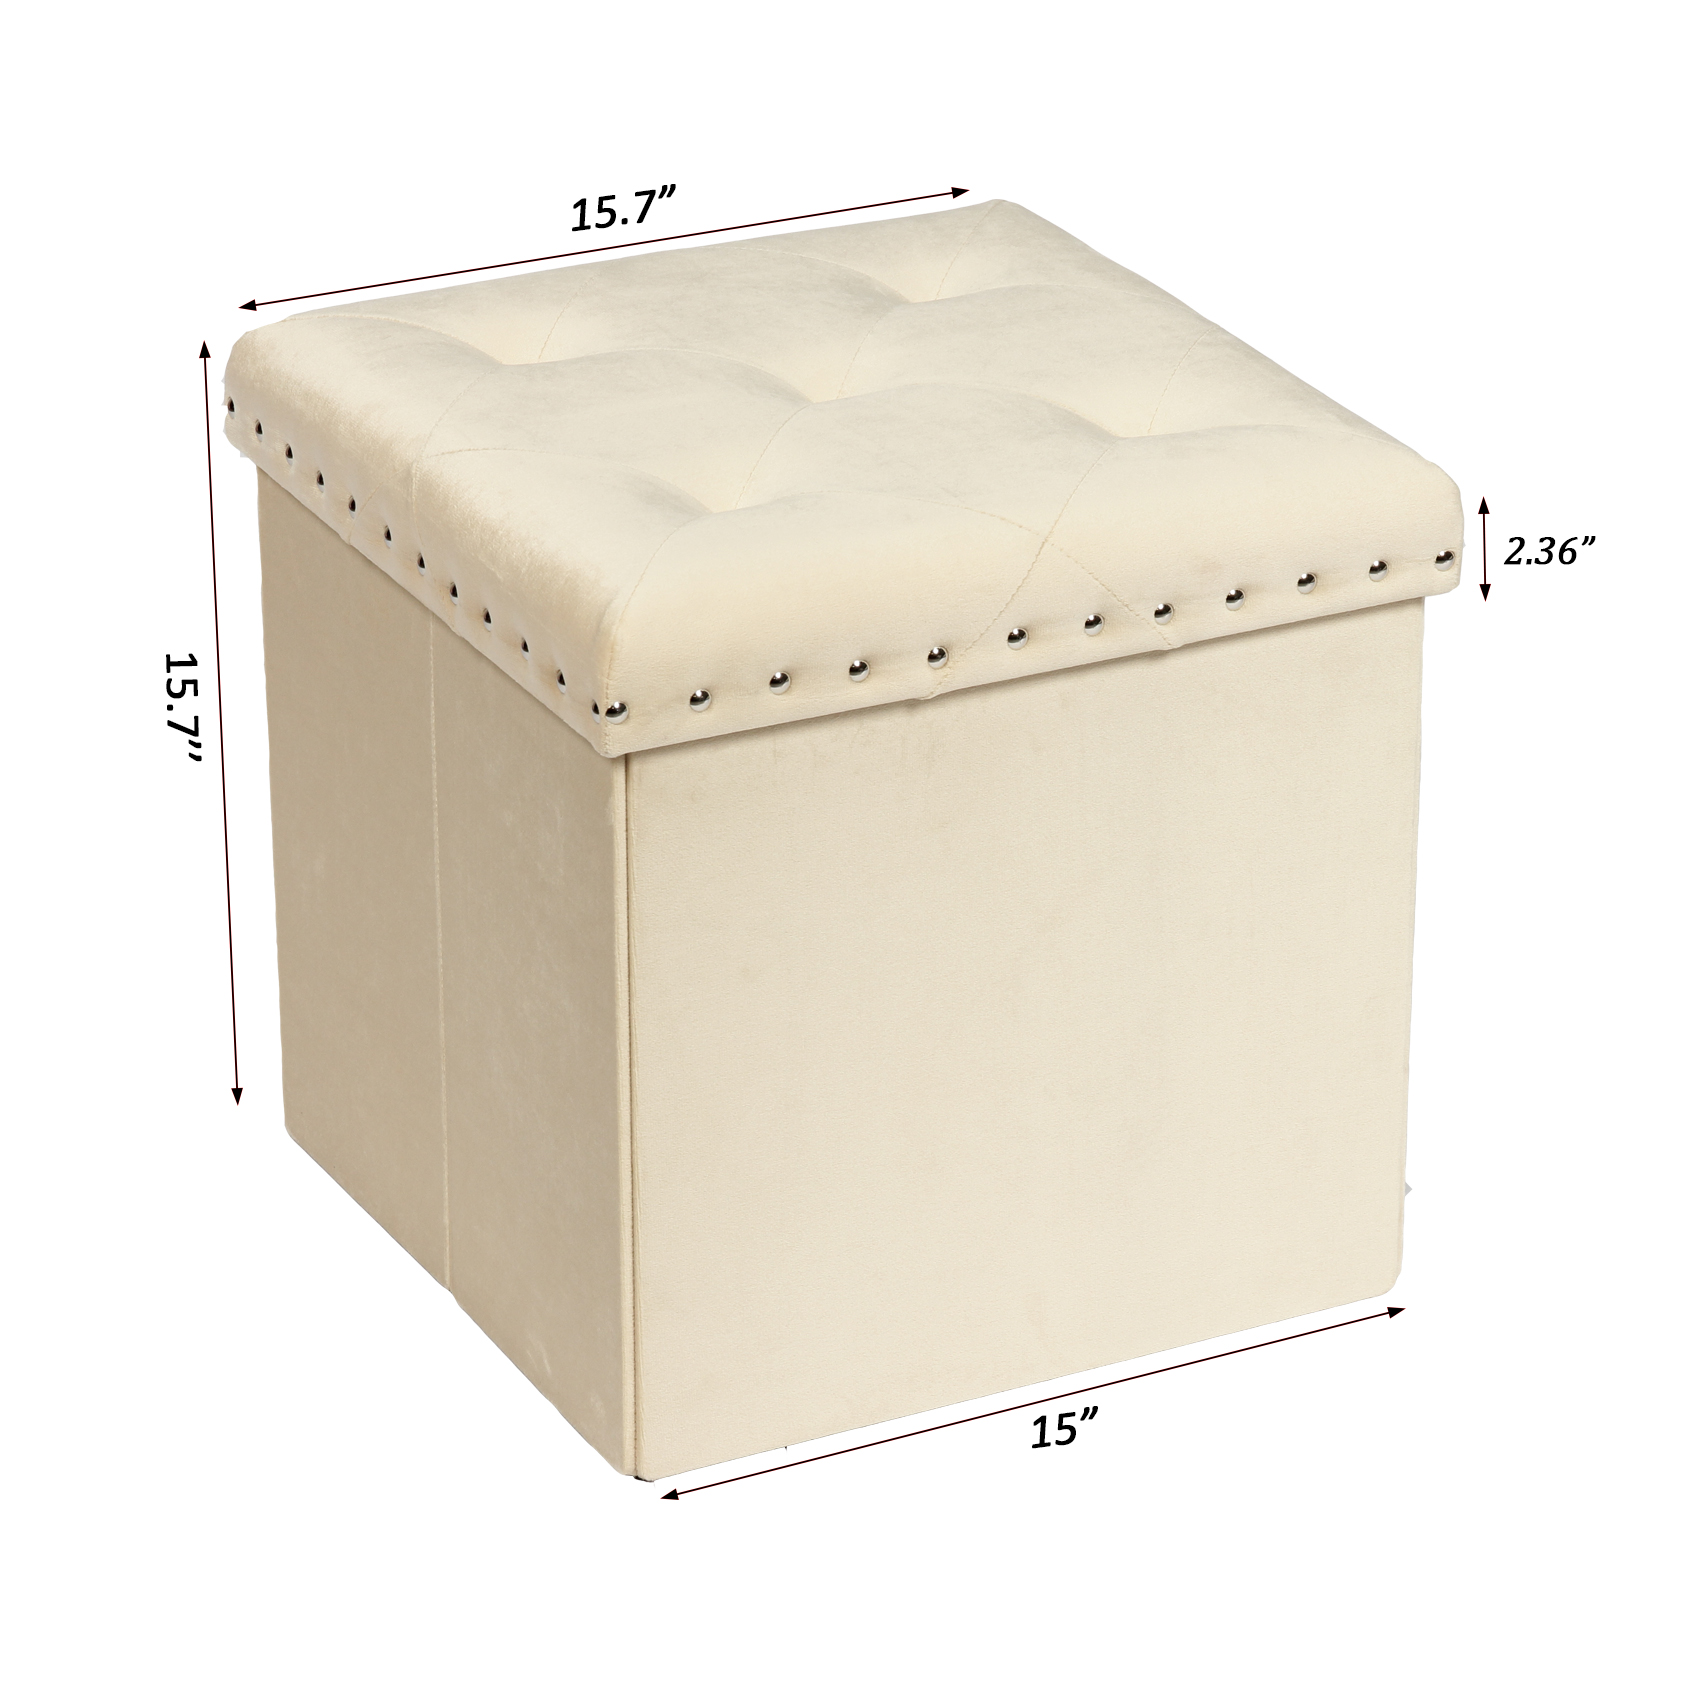 PINPLUS 15.7" Beige Velvet Folding Storage Ottoman Cube, Small Foot Rest Stool, Window Seat for Living Room, Toy Chest Box with Rivet Tray - image 4 of 7